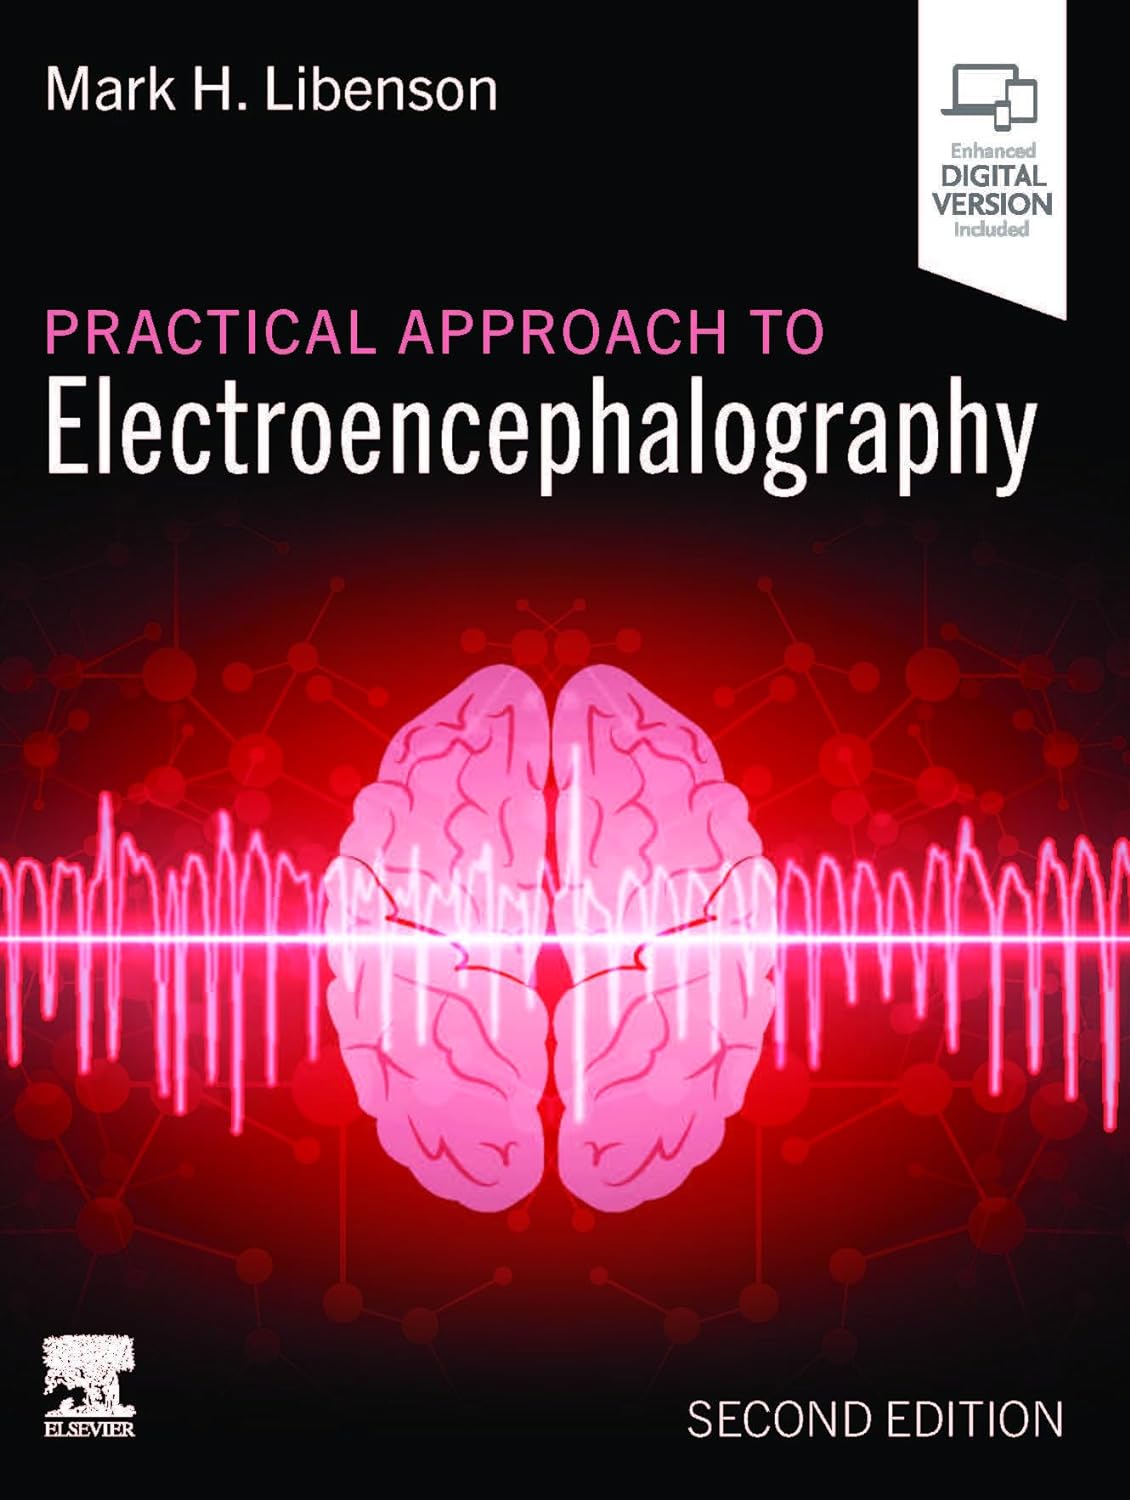 (EBook PDF)Practical Approach to Electroencephalography, 2nd edition by Mark H. Libenson MD